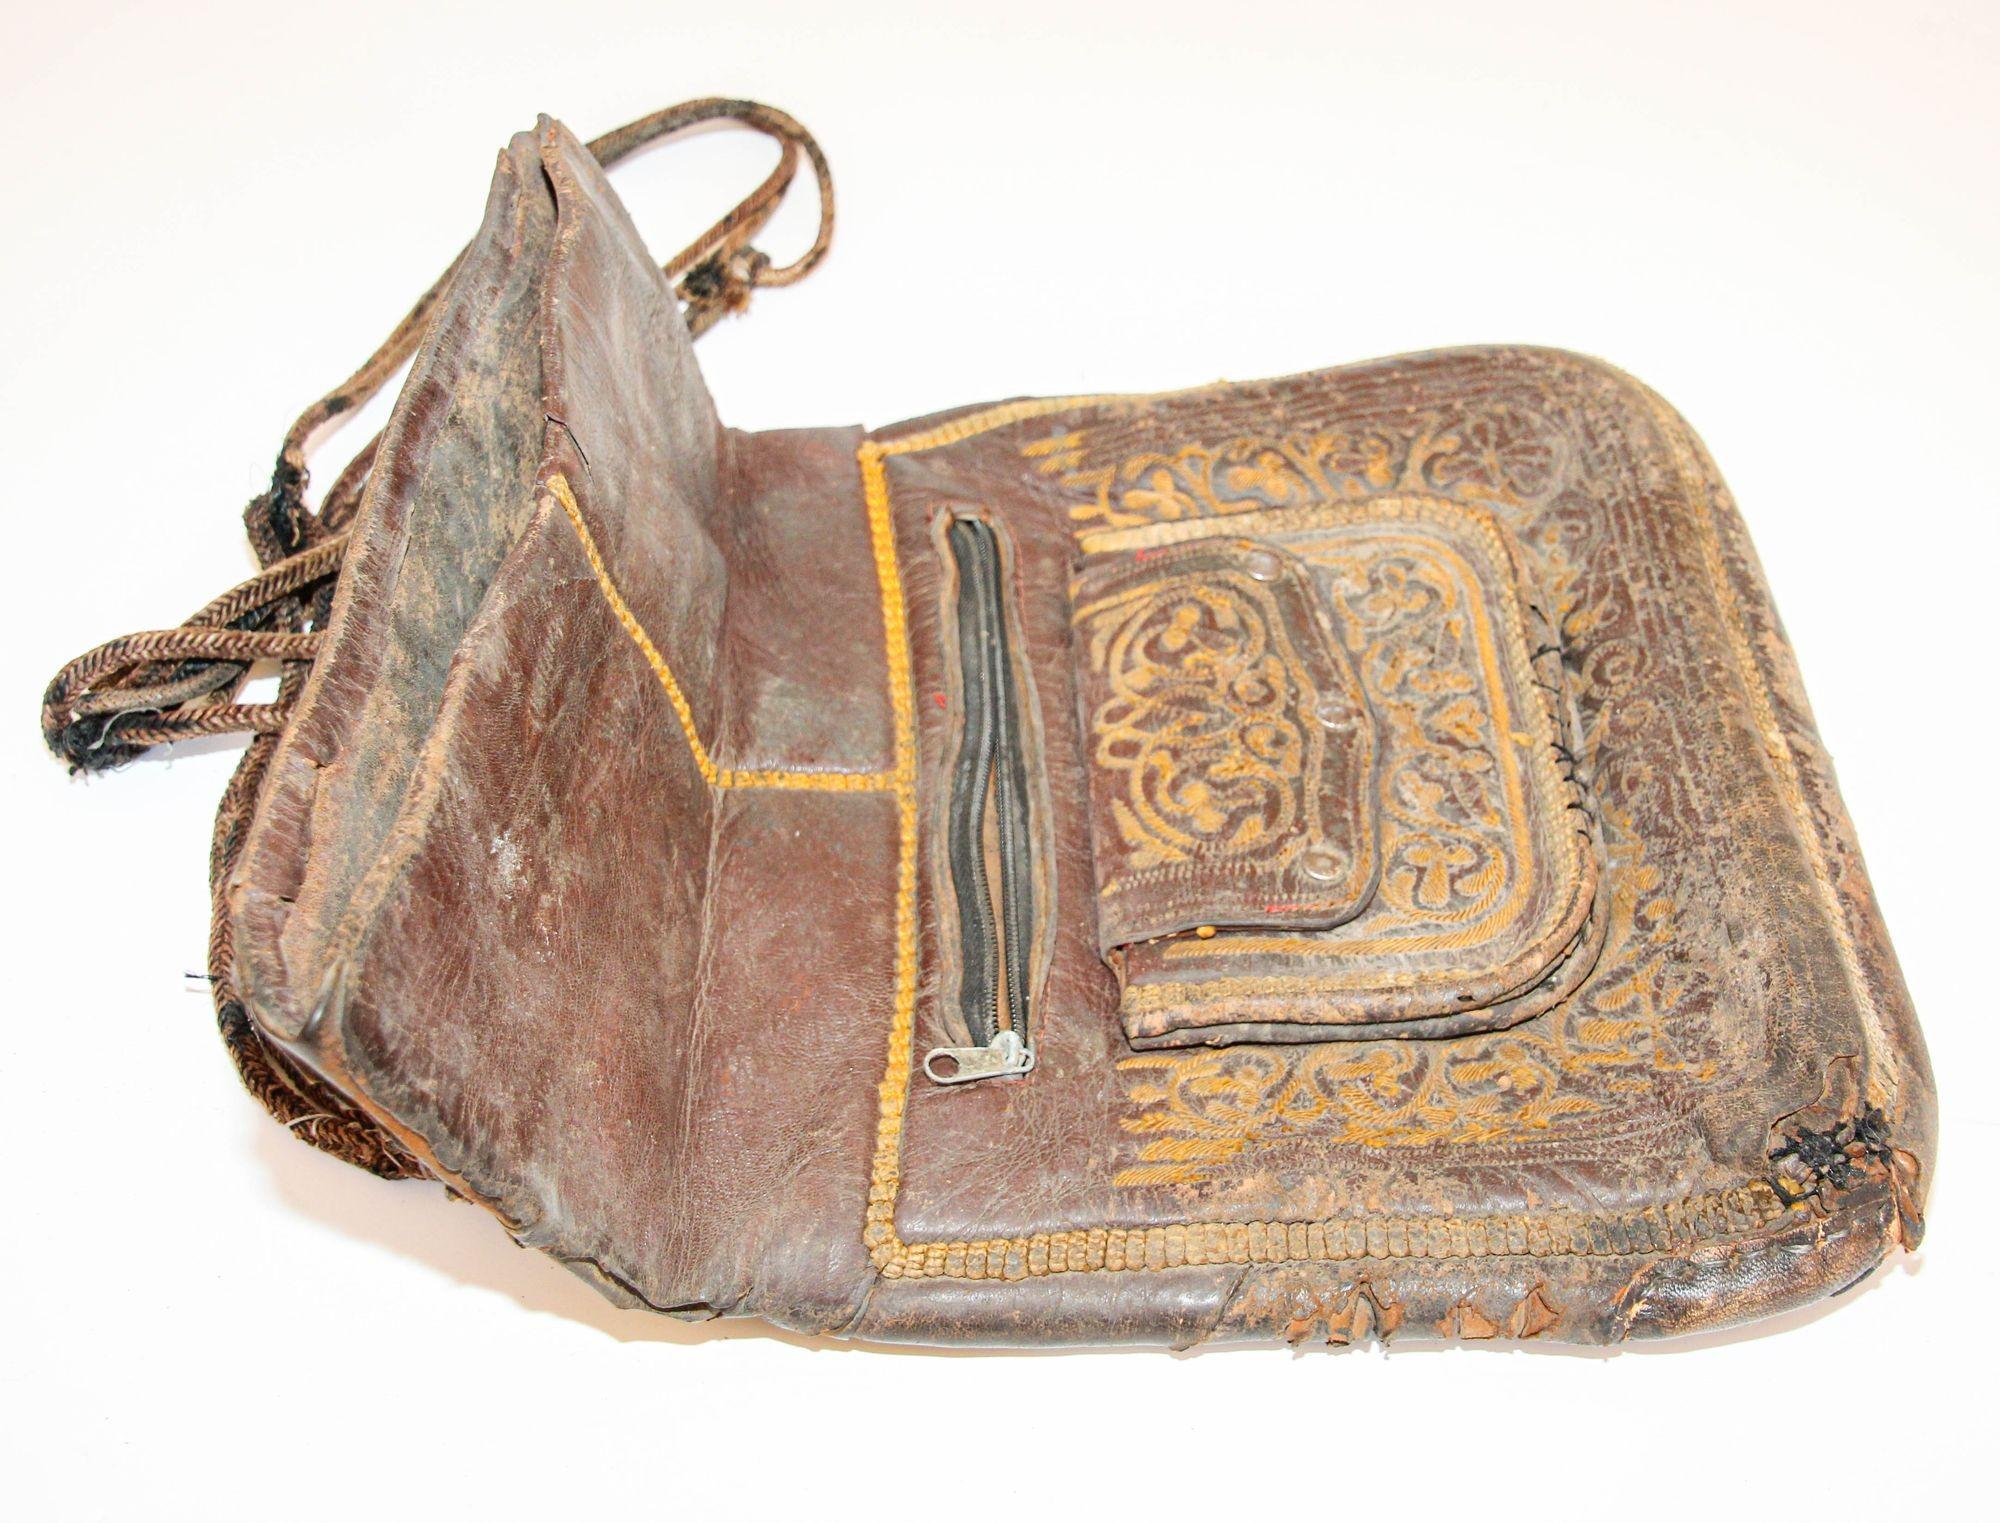 Antique Moroccan Collectible Messenger Bag Hand Tooled Leather Marrakech 1920s 2